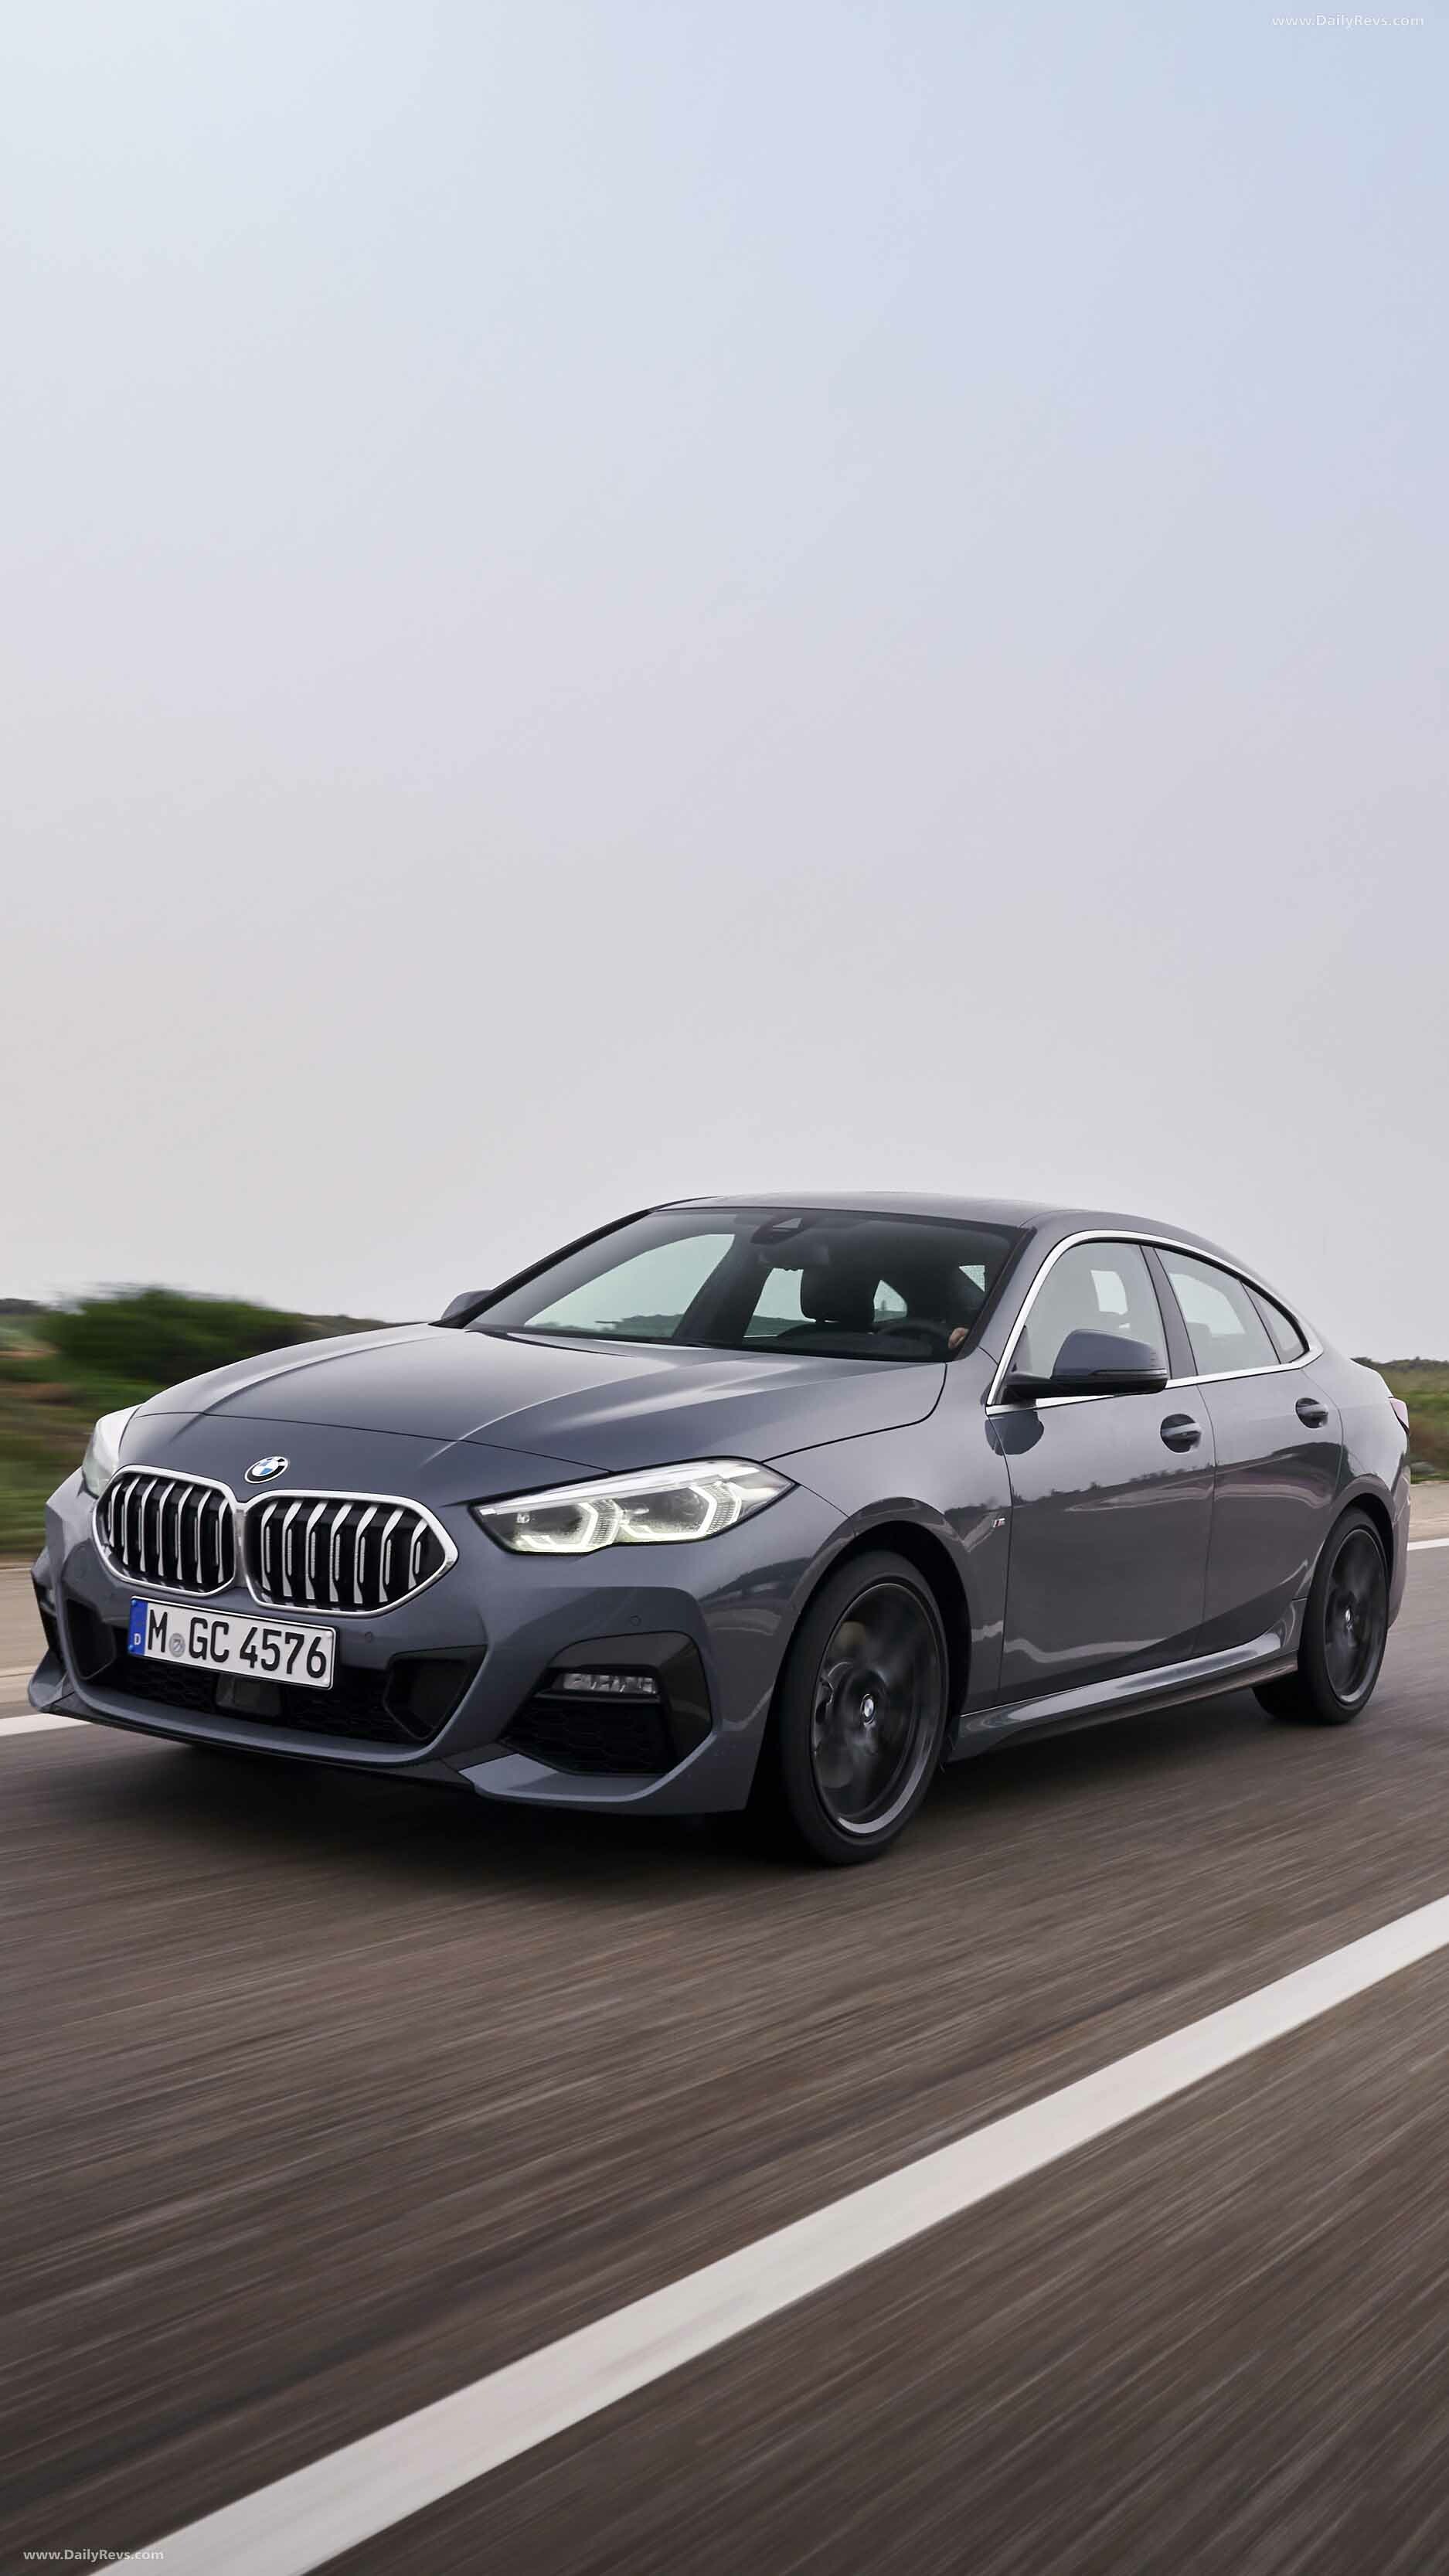 BMW 2 Series: Based on the popular X1 SUV, the 2020 Gran Coupe, An entry-level sedan with a rakish roofline and standard all-wheel drive. 1880x3340 HD Background.